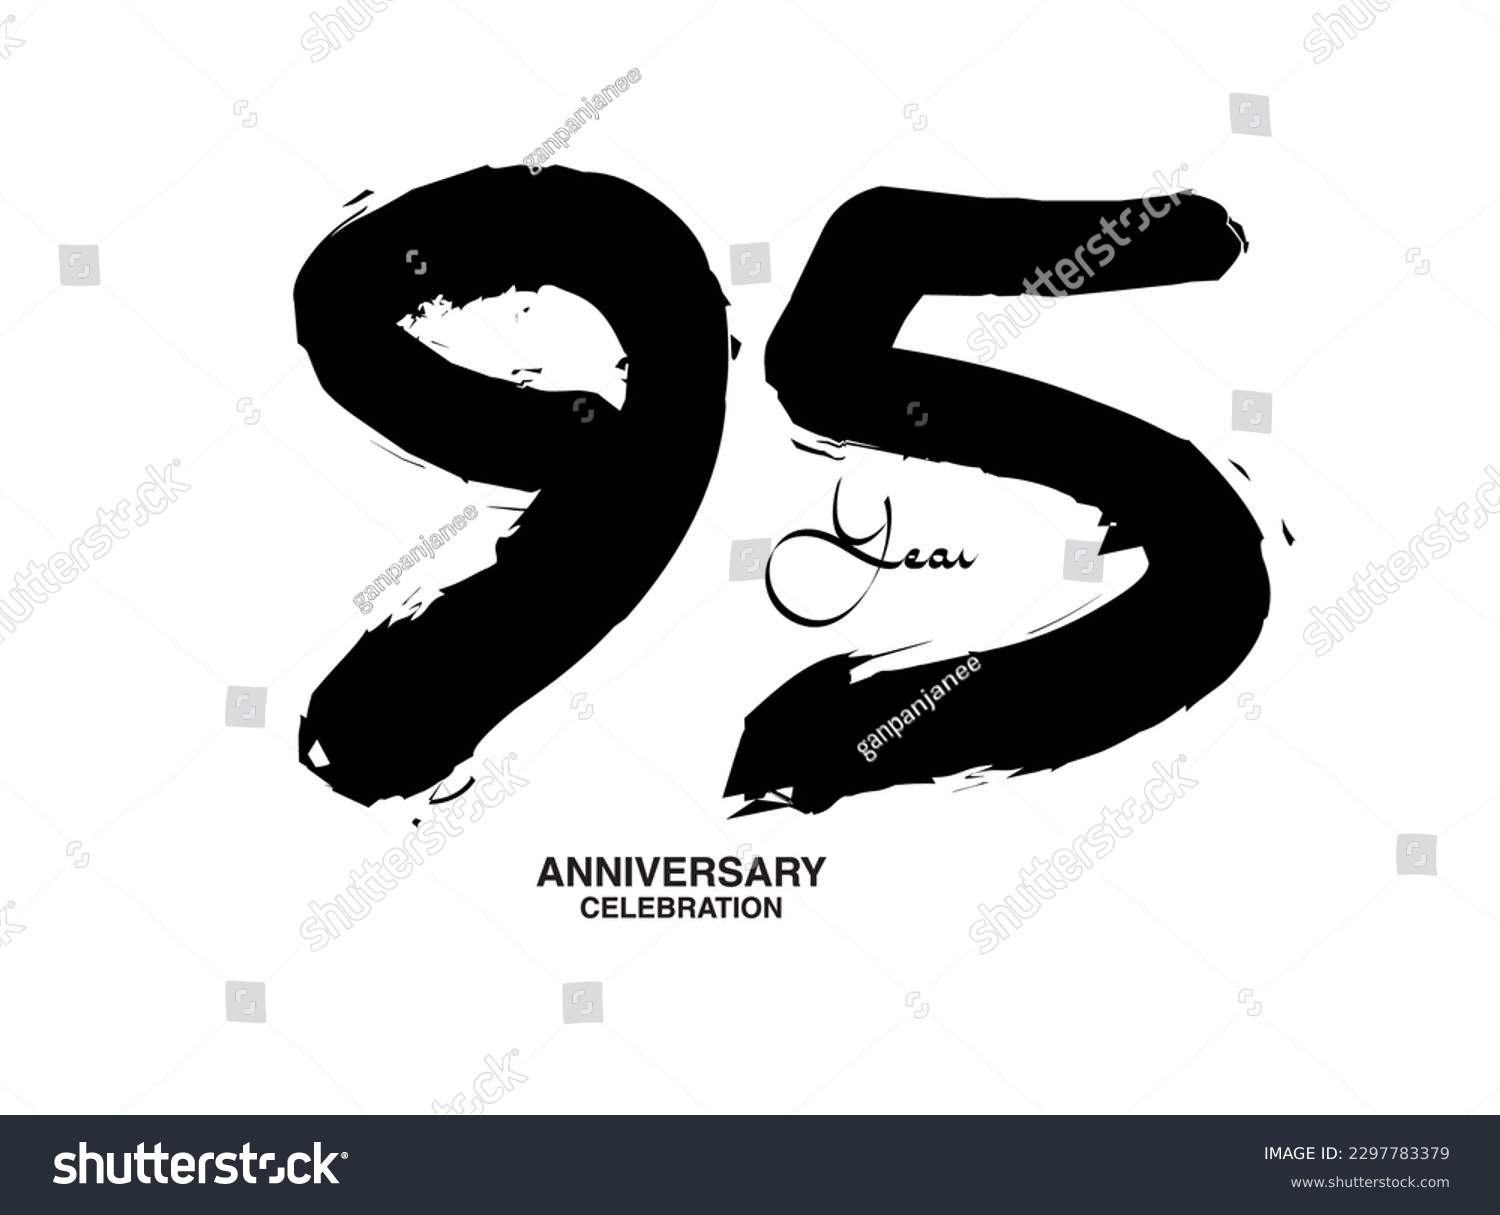 SVG of 95 Years Anniversary Celebration Vector Template, 95 number logo design, 95th birthday, Black Lettering Numbers brush drawing hand drawn sketch, black number, Anniversary vector illustration svg